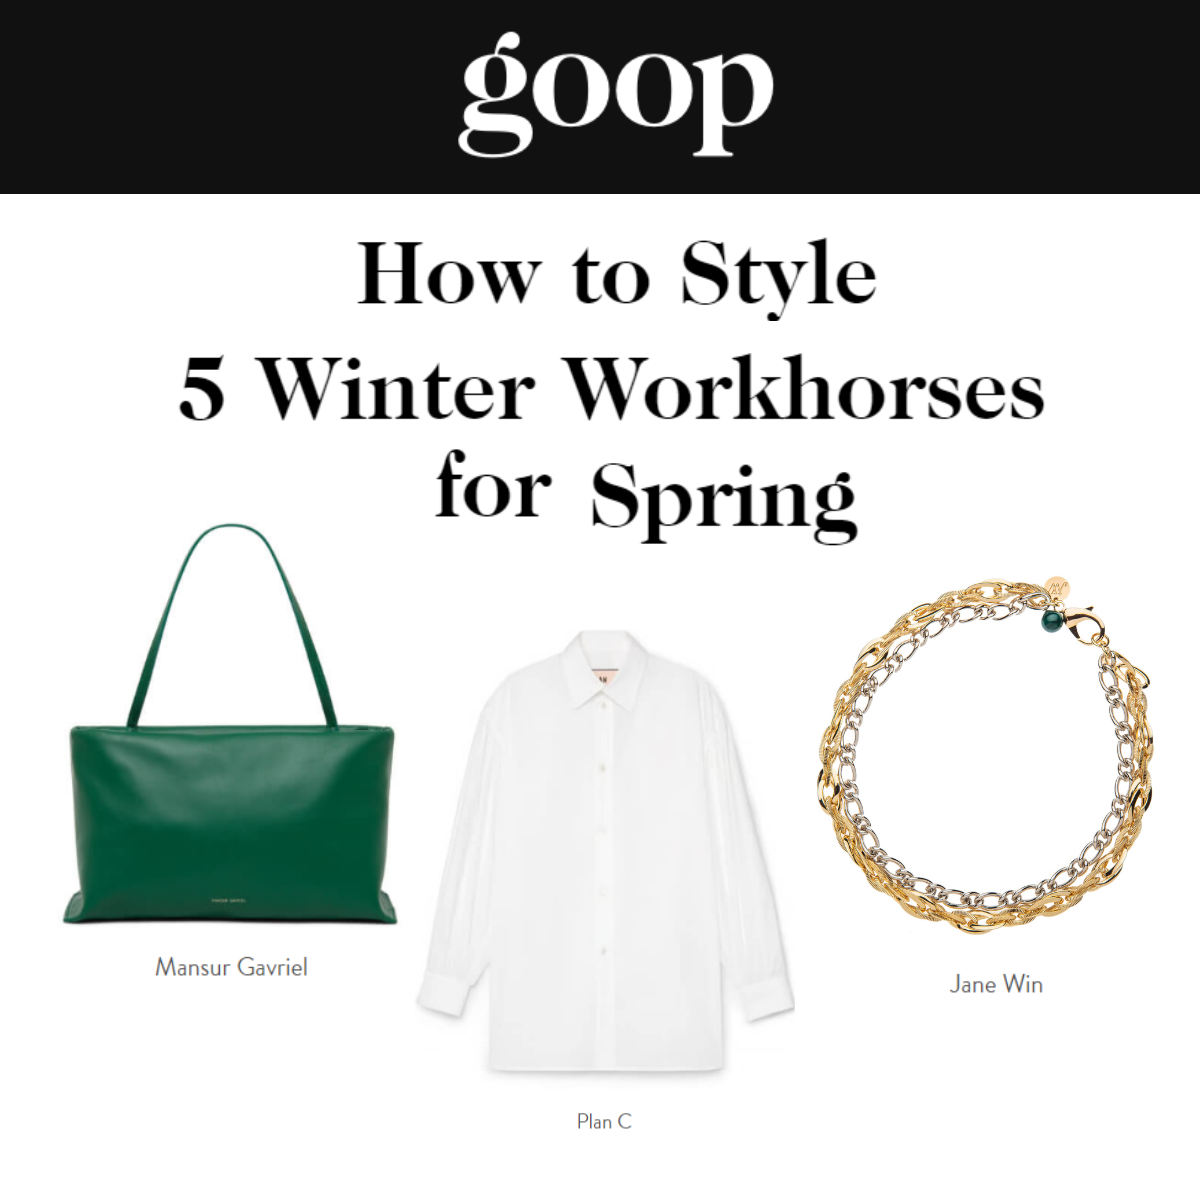 Press Highlight: Styling goop's Most-Worn Pieces for Spring